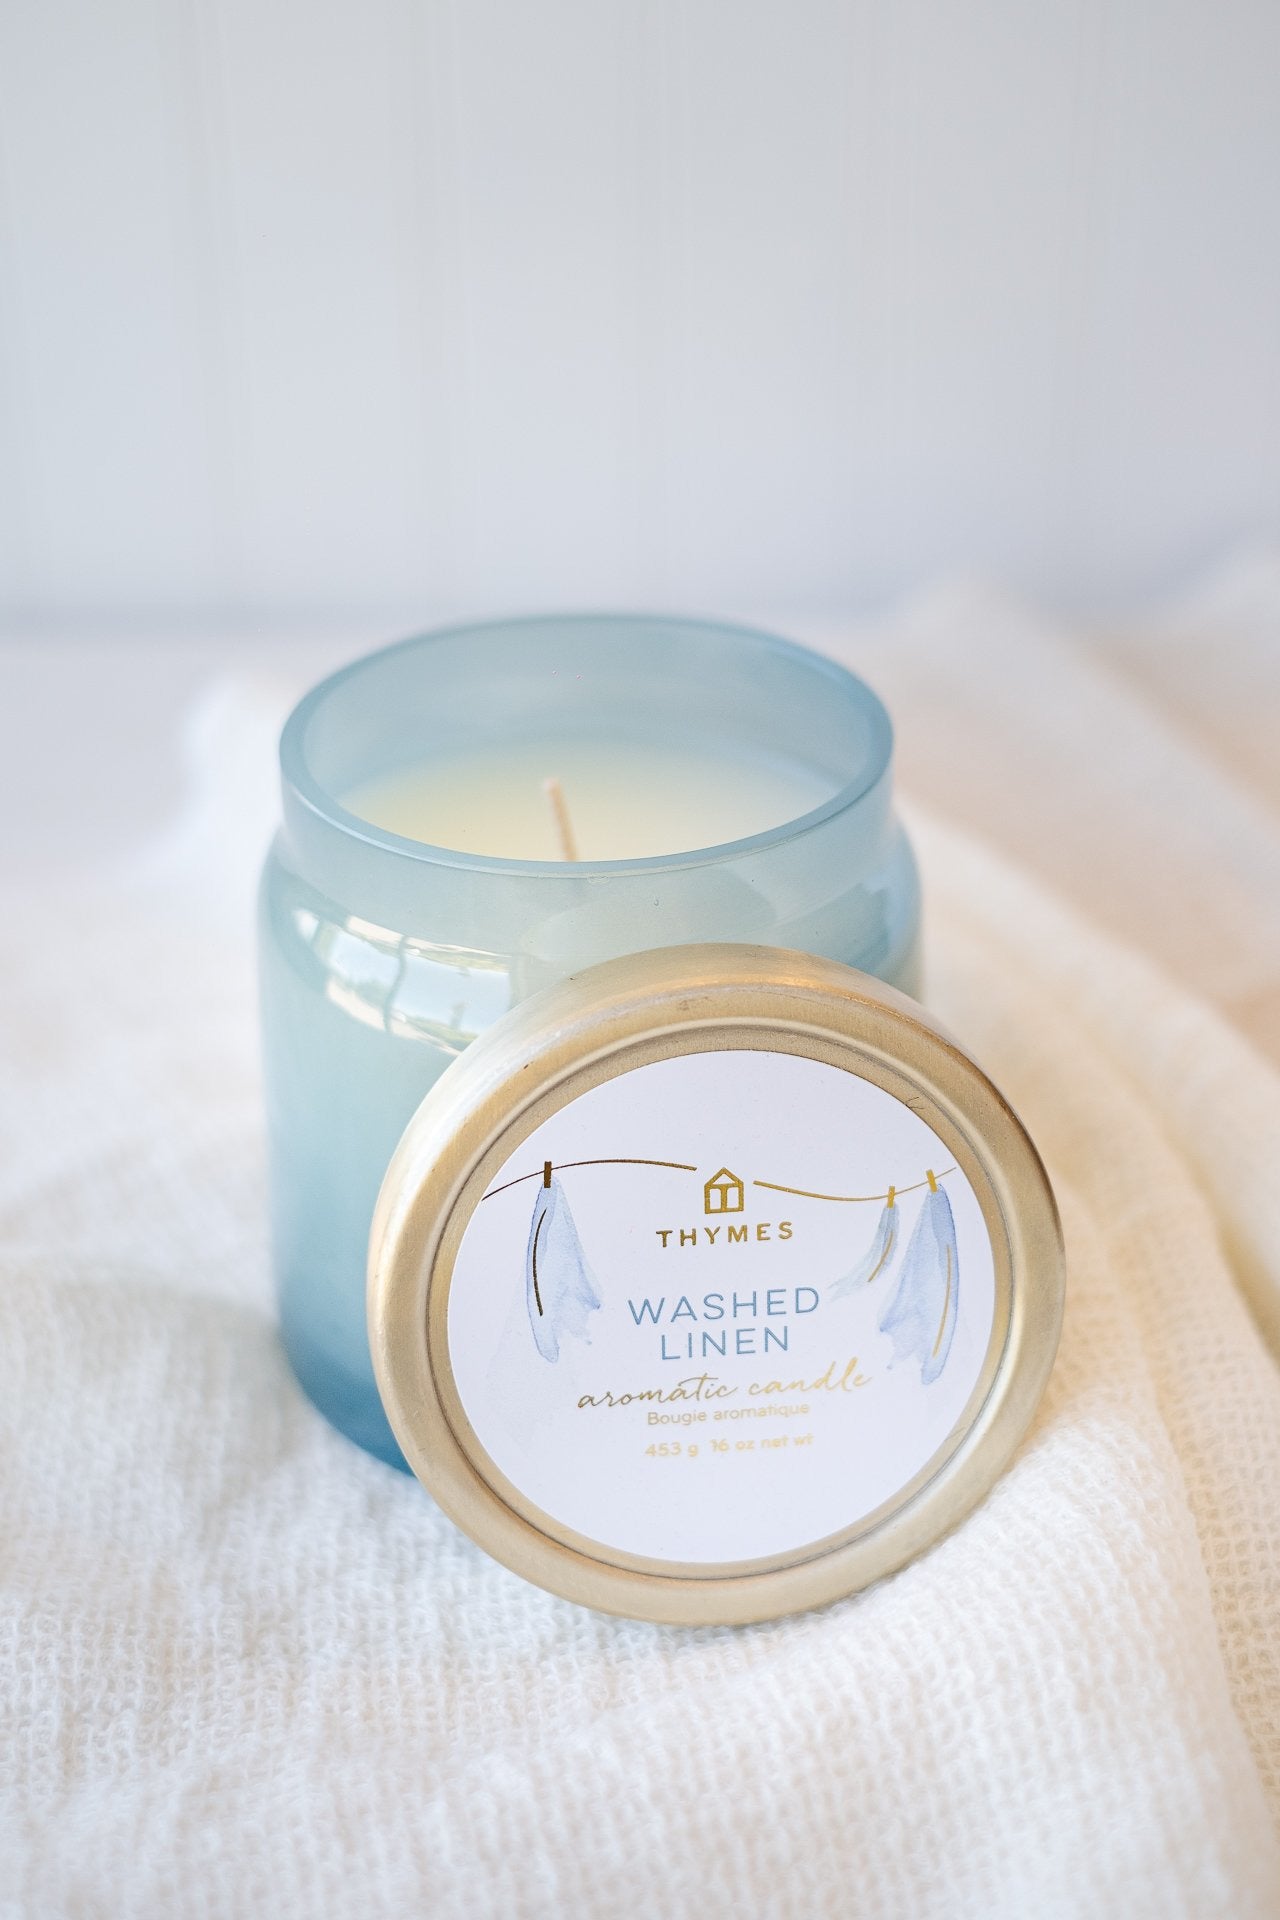 Thymes Washed Linen Statement Poured Candle